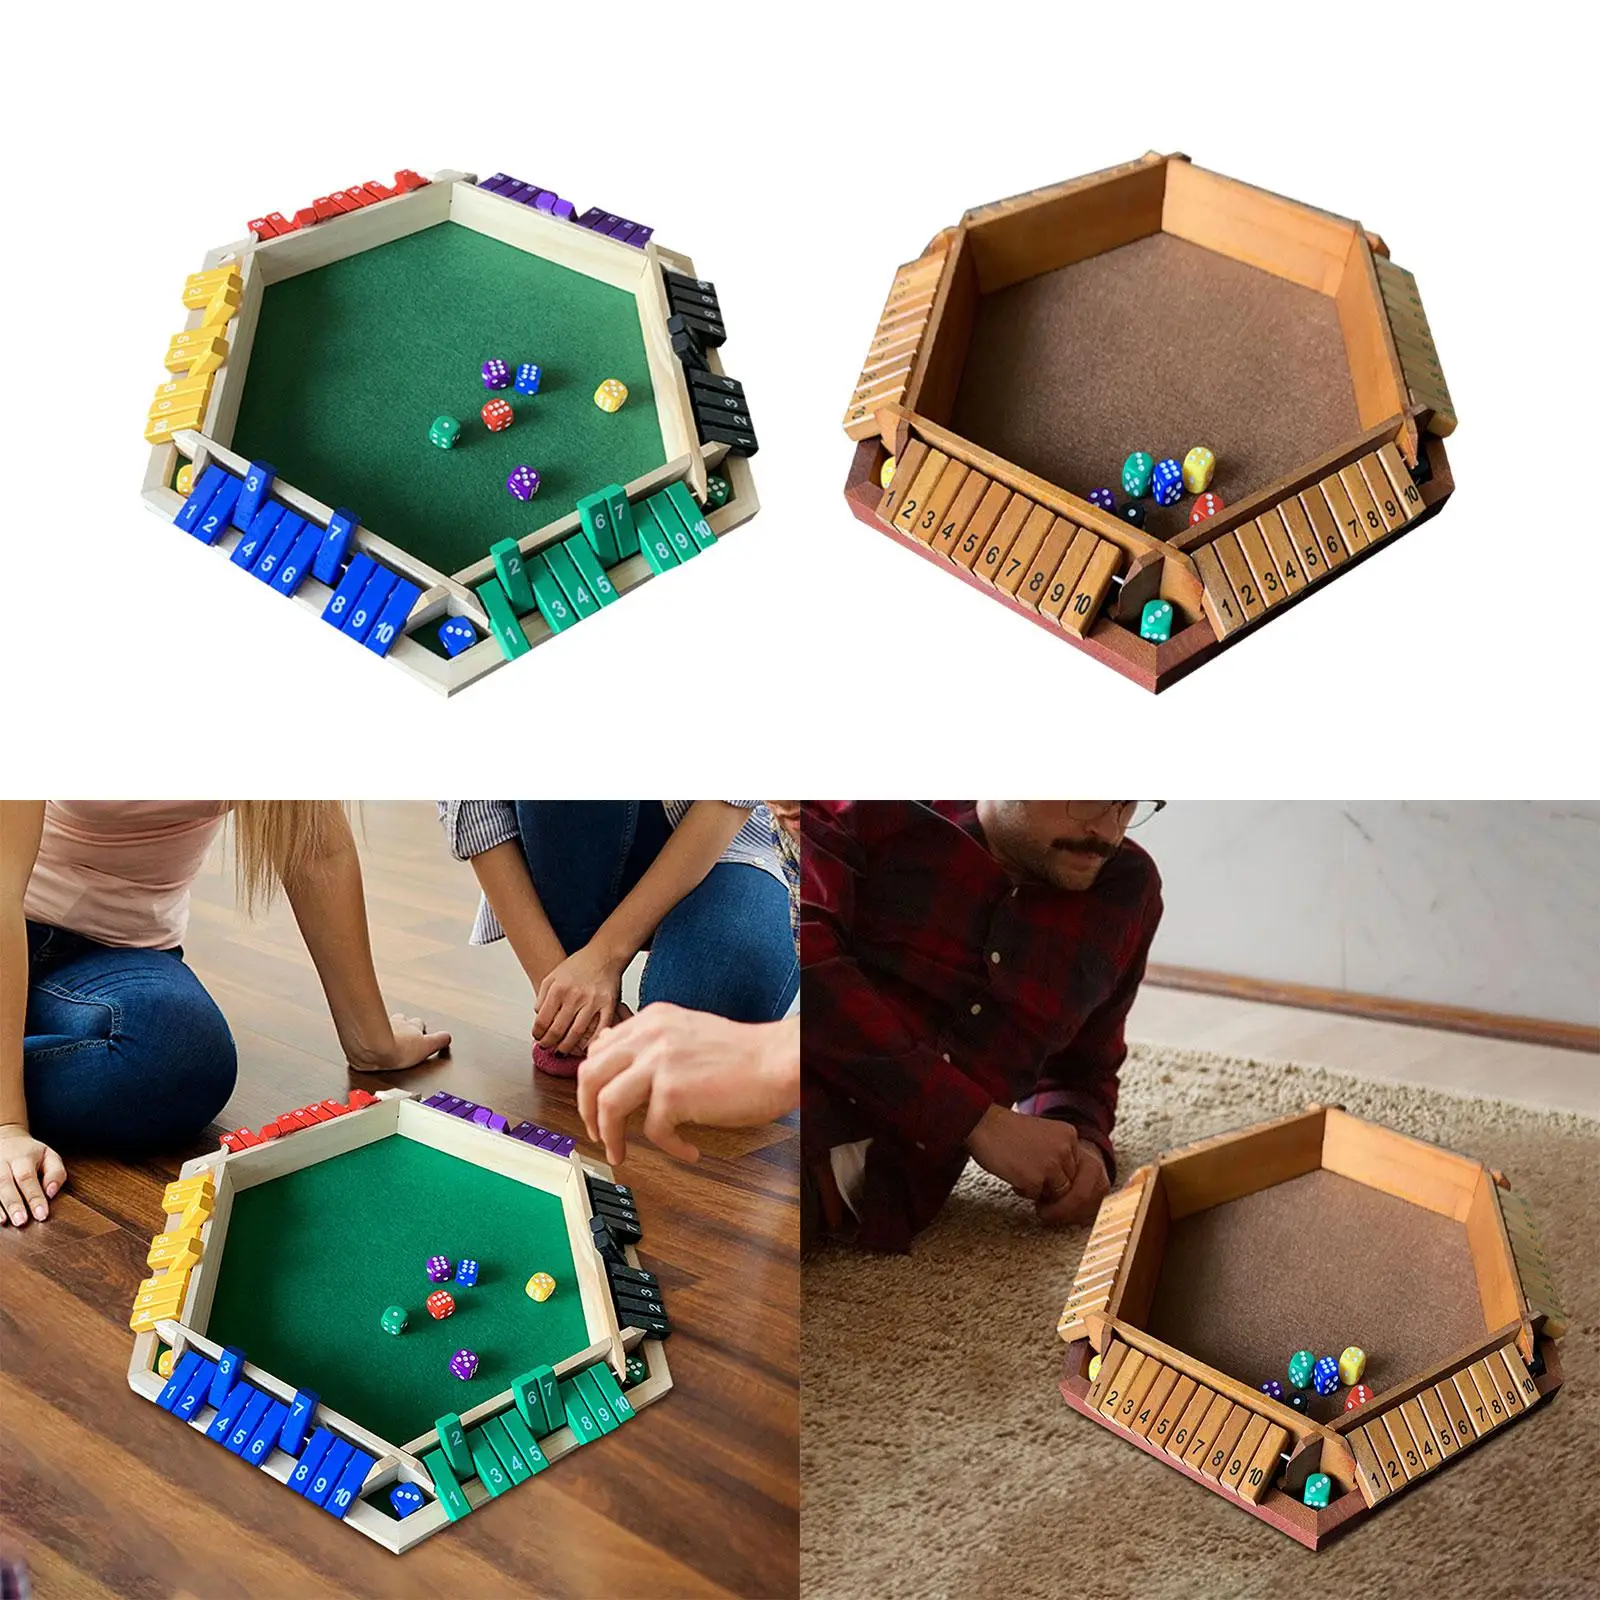 Wooden Table Dice Games 2-6 Players Game Math Game for Bar Pub Cafe